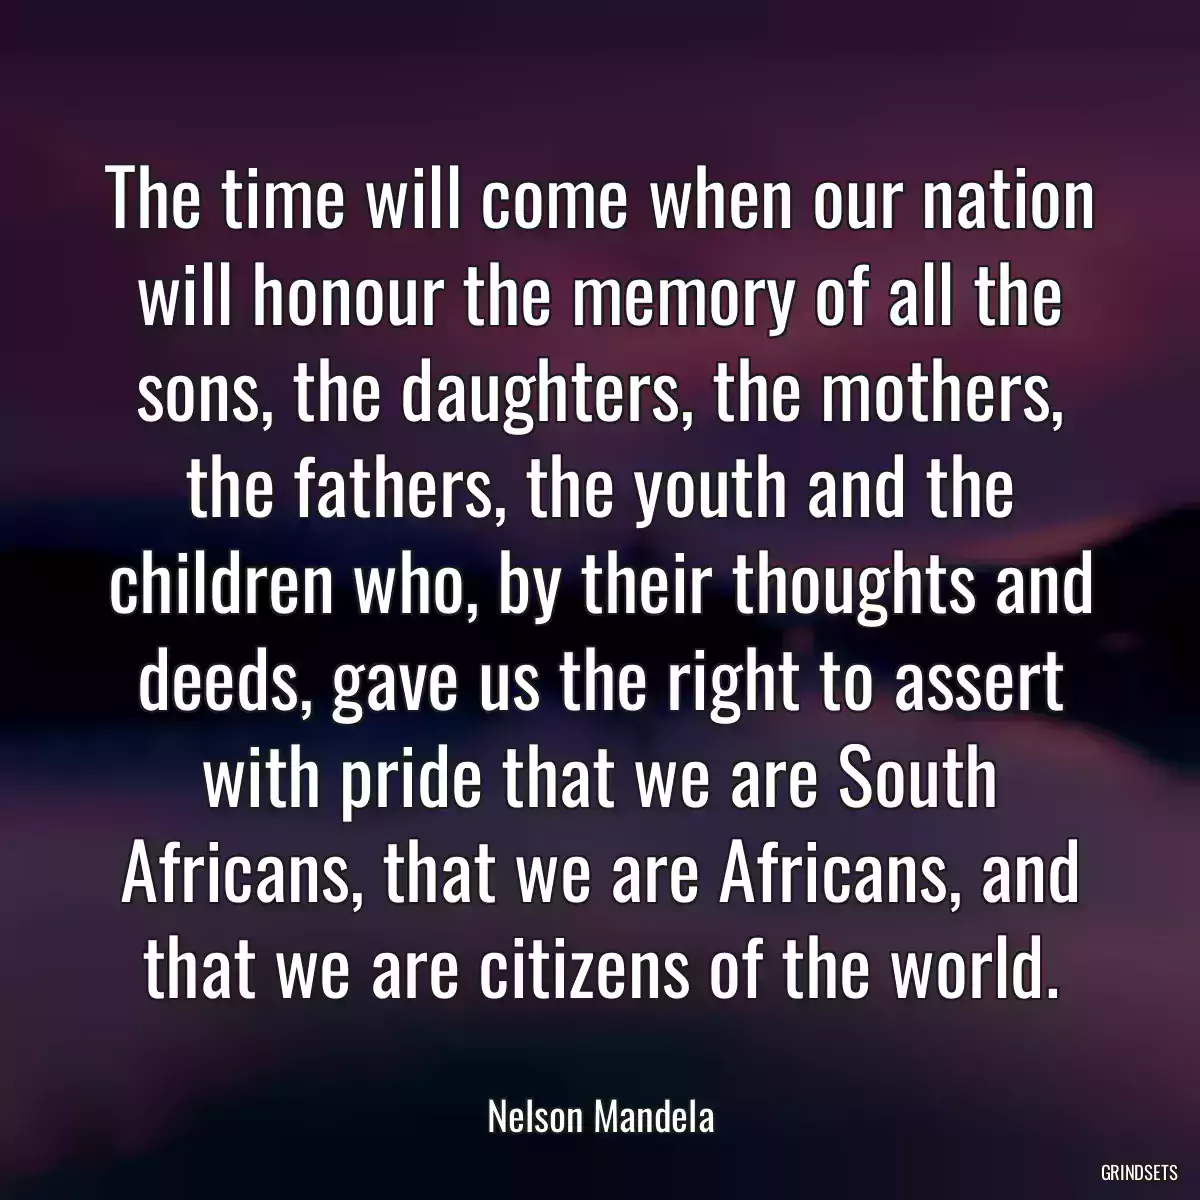 The time will come when our nation will honour the memory of all the sons, the daughters, the mothers, the fathers, the youth and the children who, by their thoughts and deeds, gave us the right to assert with pride that we are South Africans, that we are Africans, and that we are citizens of the world.